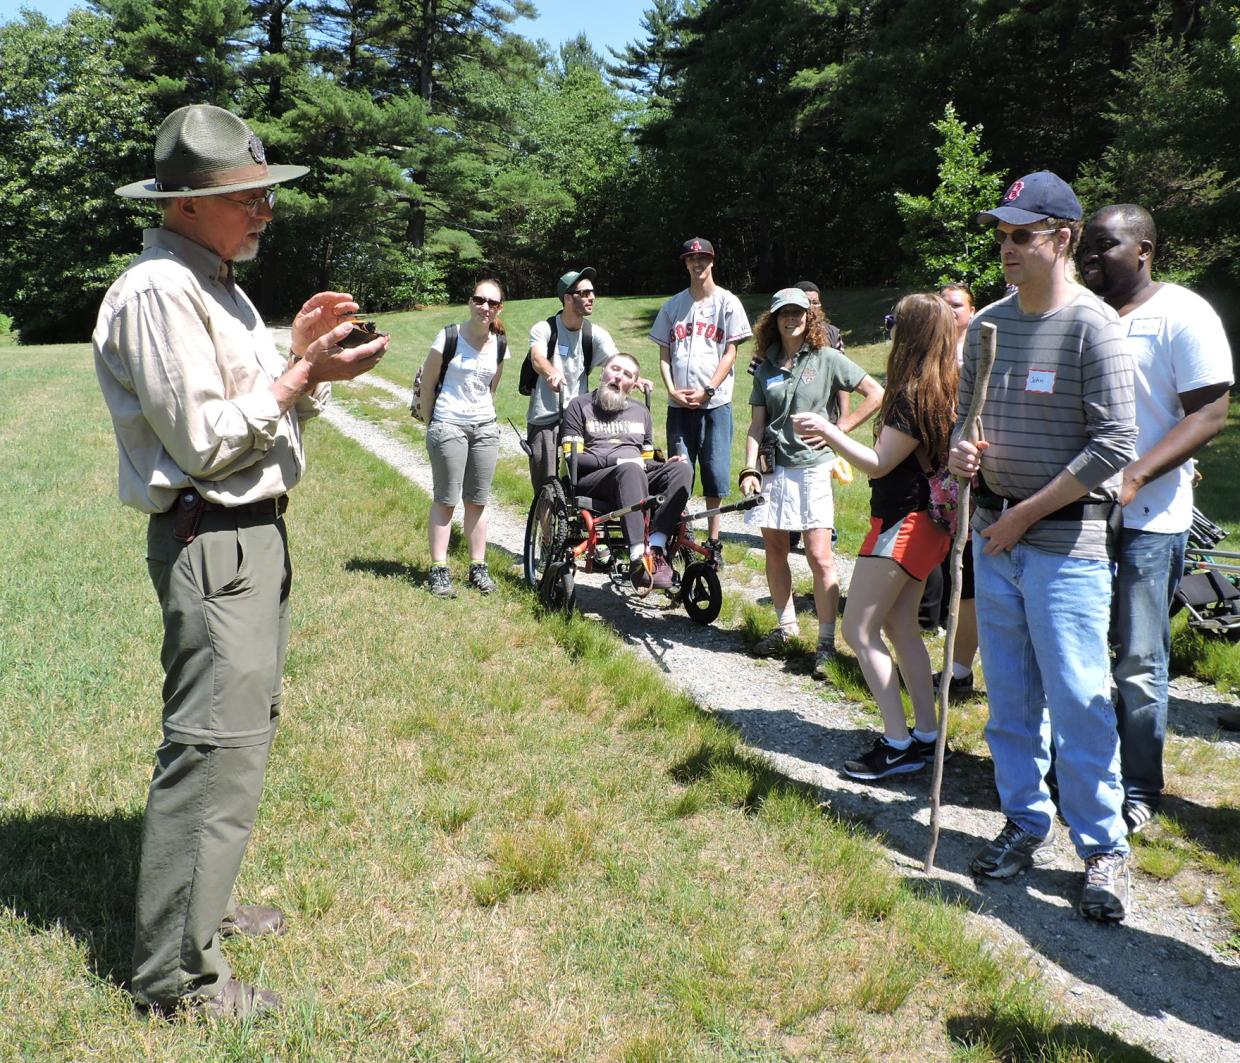 A group of hikers listens to a DCR staff member holding a turtle. Some of the hikers are using hiking wheelchair and some are using walking sticks.